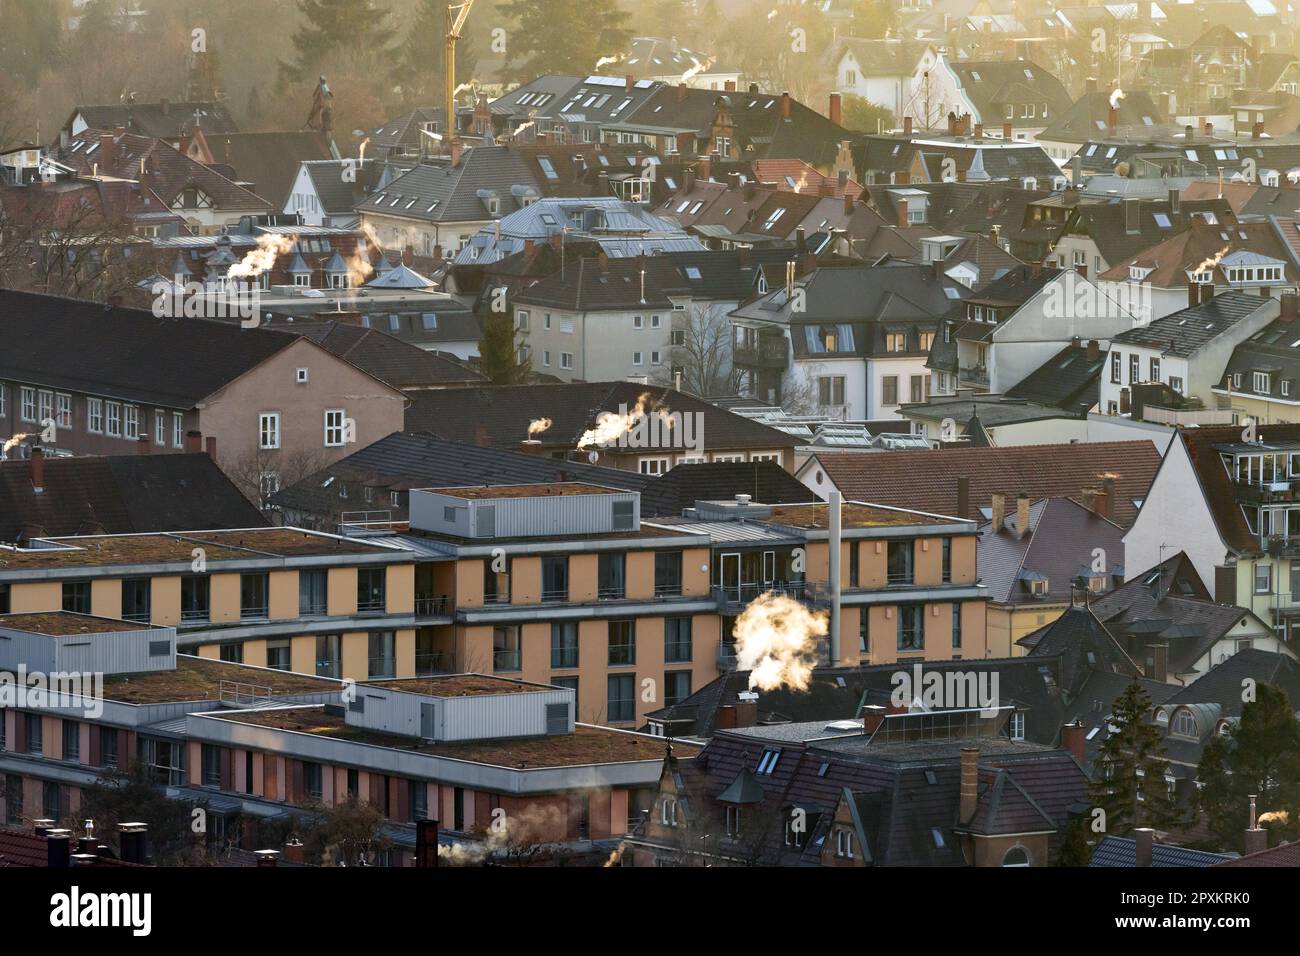 wintry roof landscape of freiburg with plumes of smoke from chimneys Stock Photo